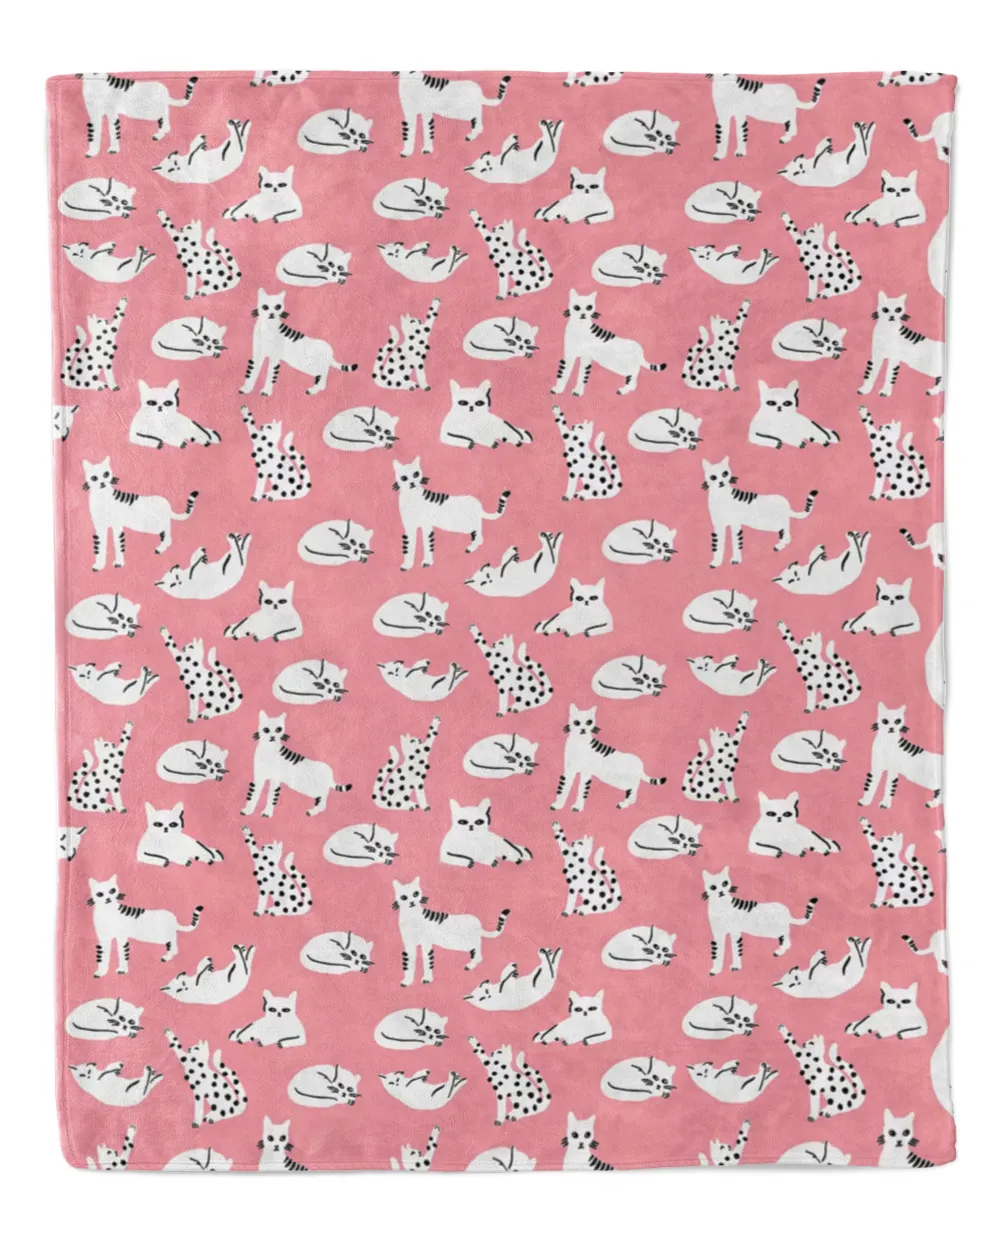 Pink Cat Blanket, Cute Gift For Cat or Pet Lovers, Kitty Decor Blanket